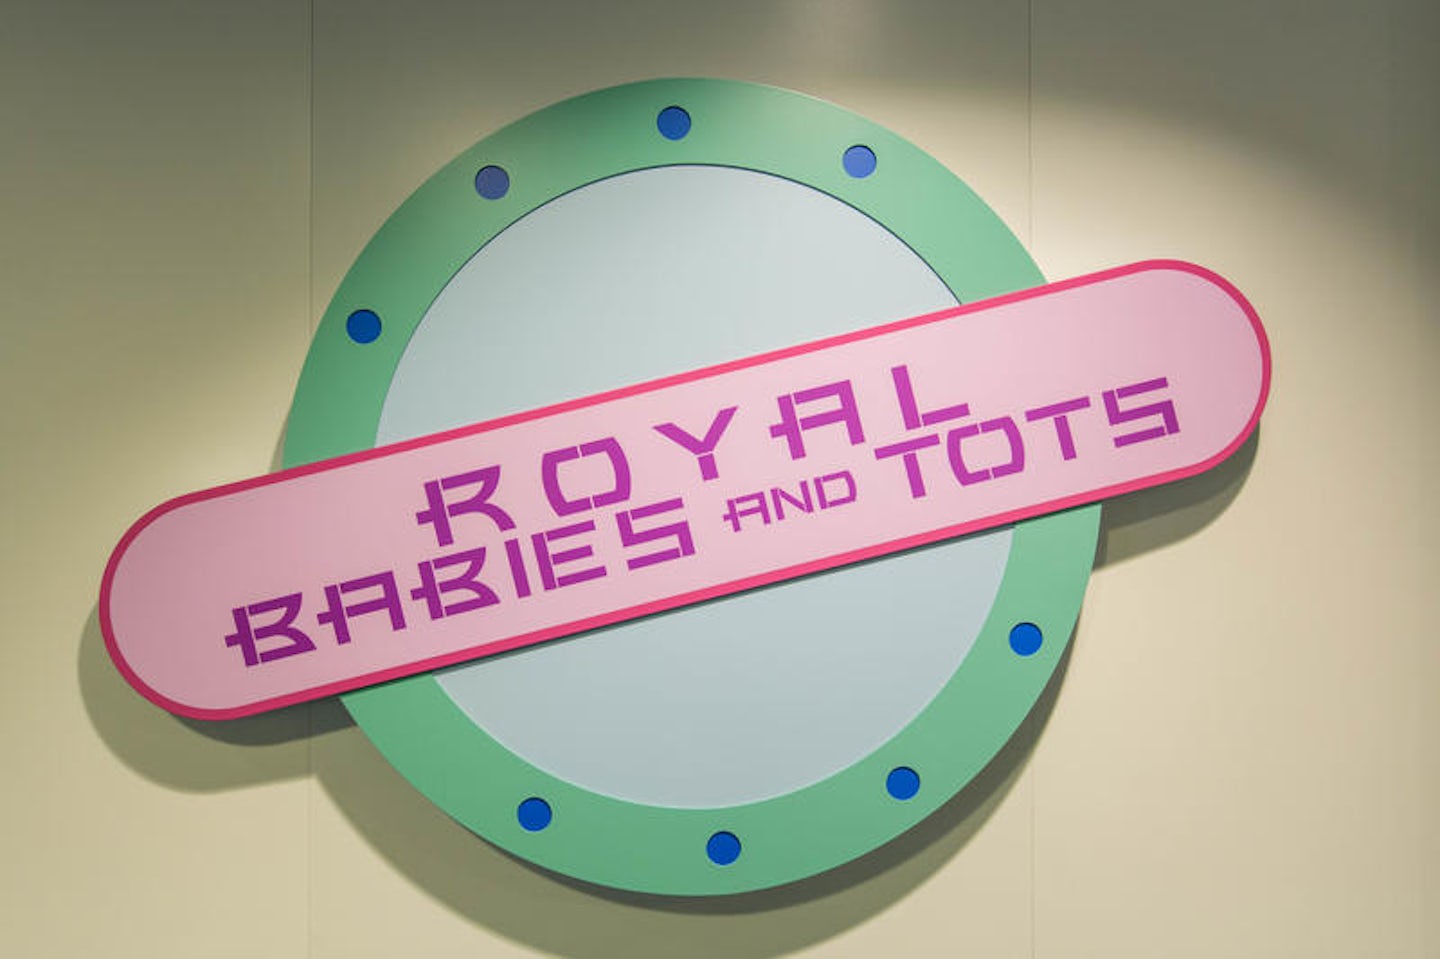 Royal Babies and Tots on Harmony of the Seas